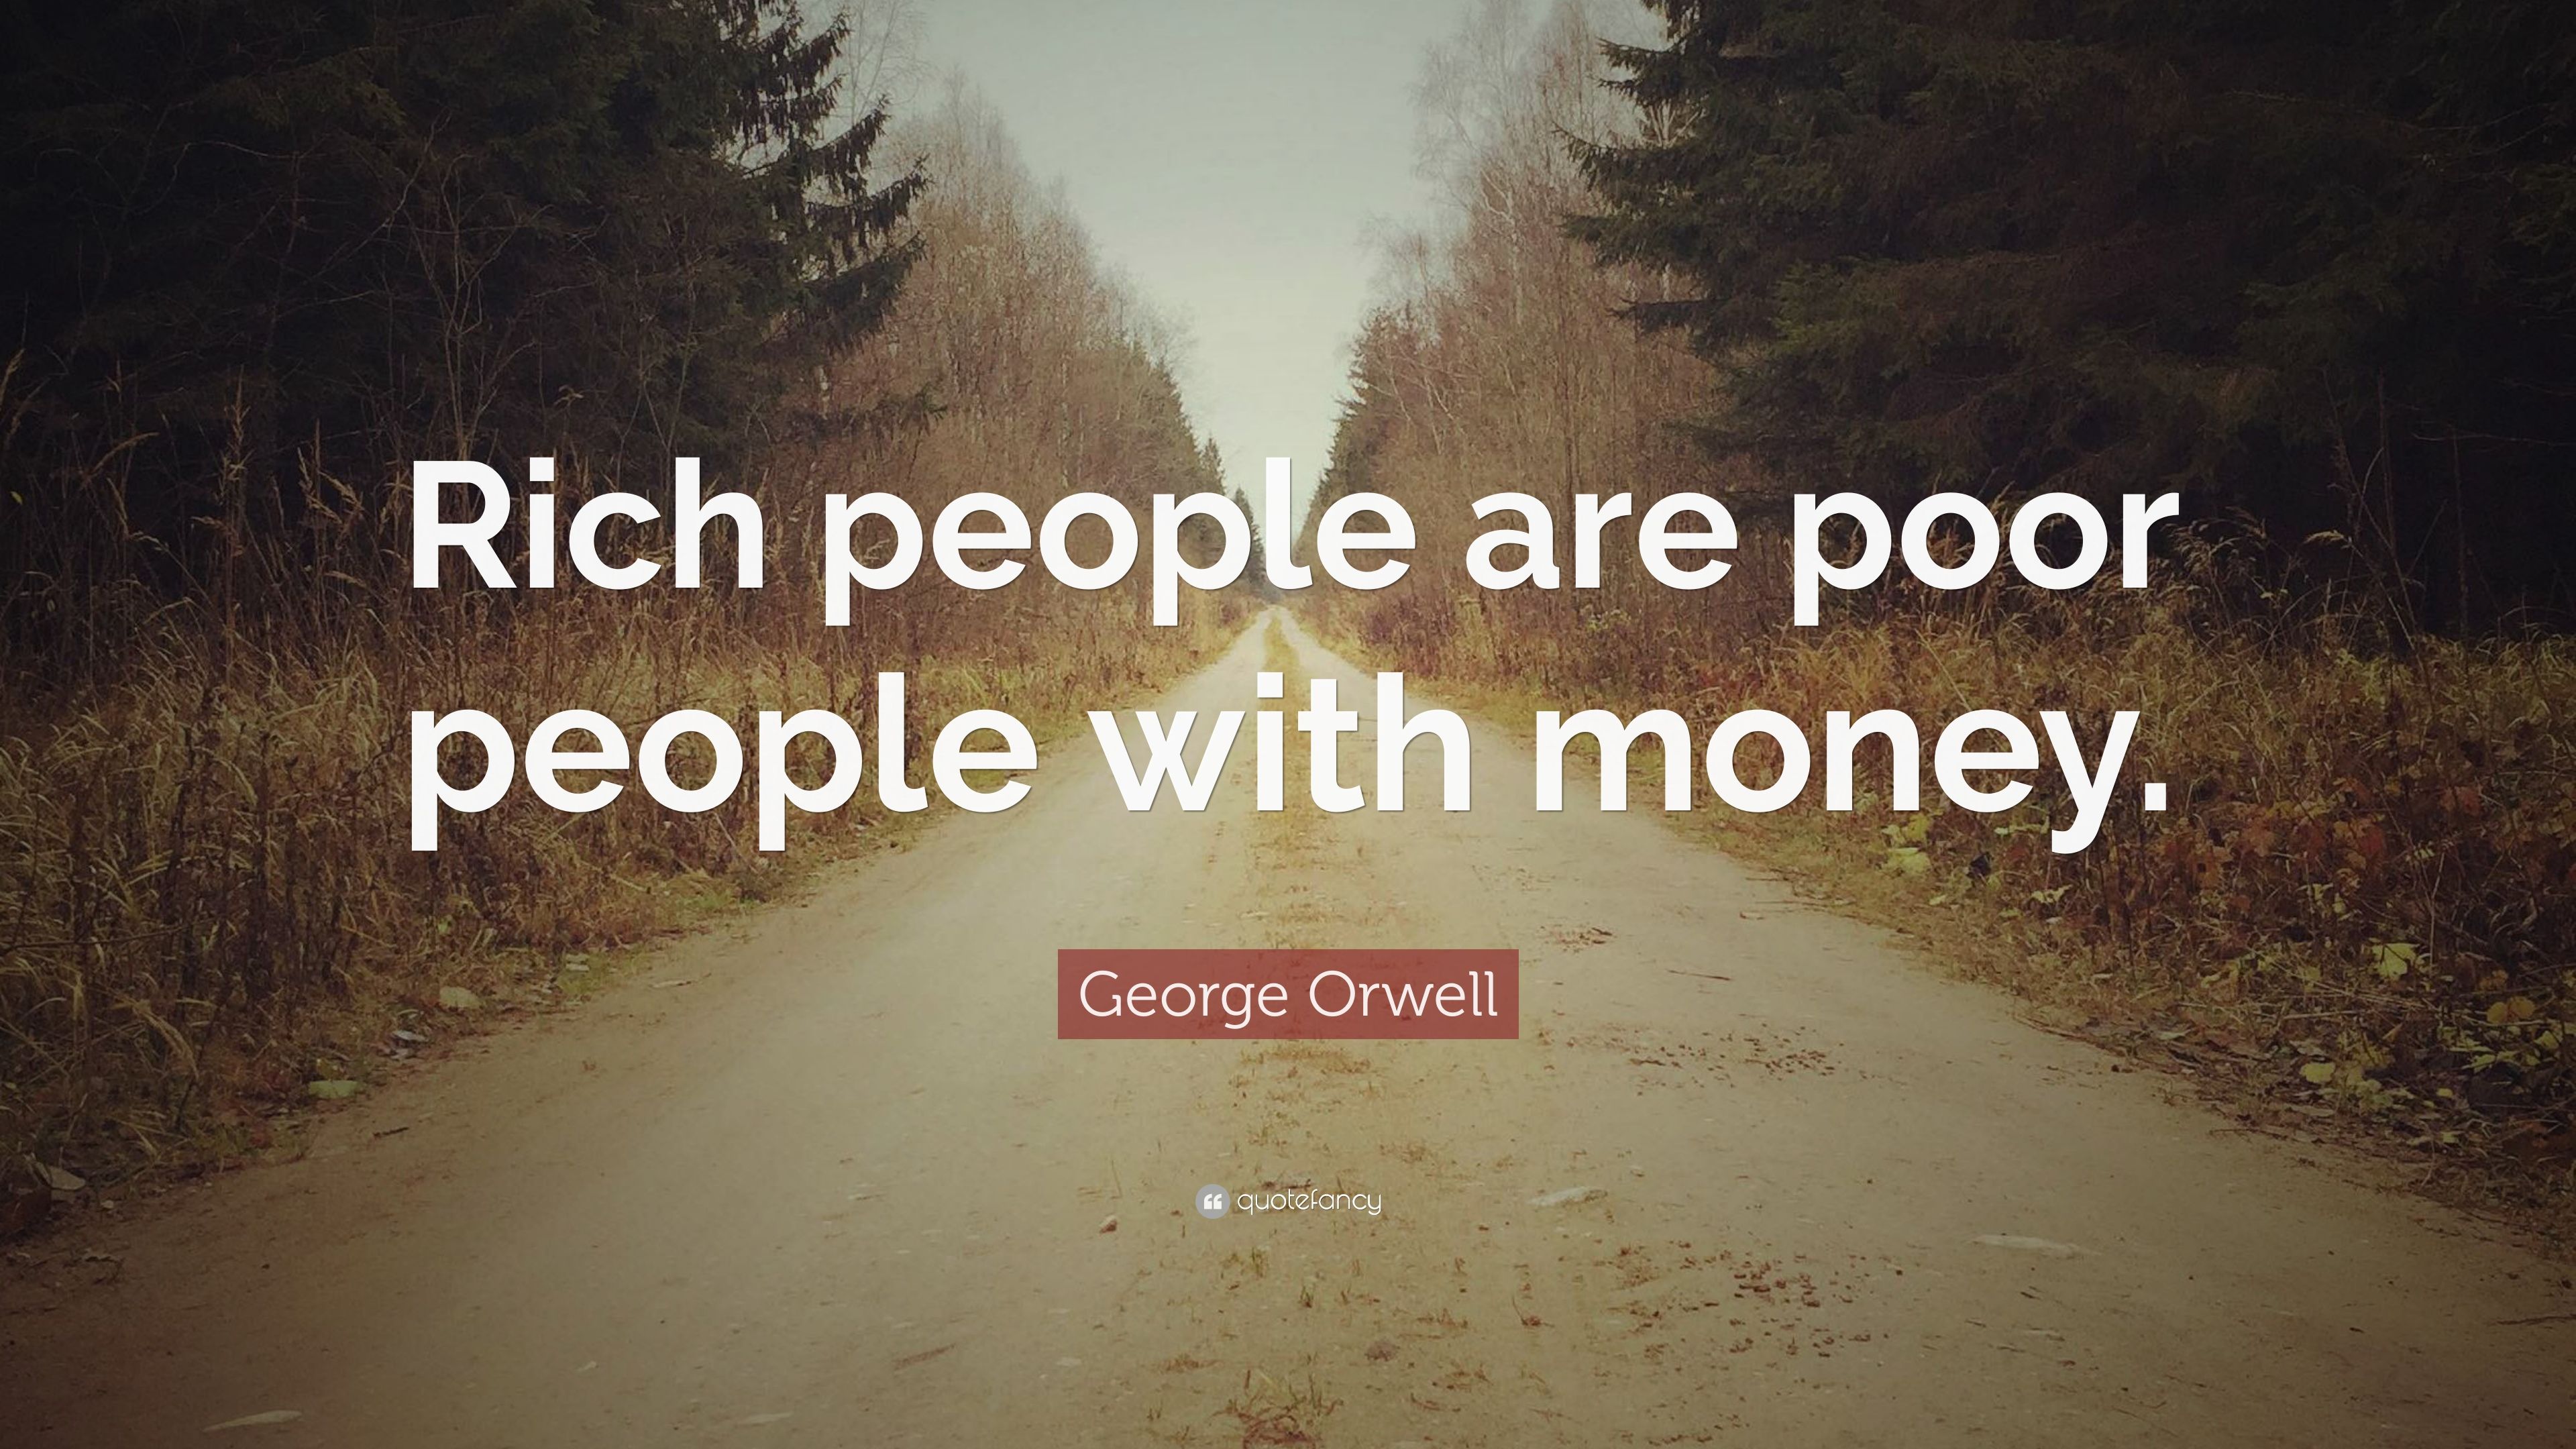 George Orwell Quote: “Rich people are poor people with money.” 12